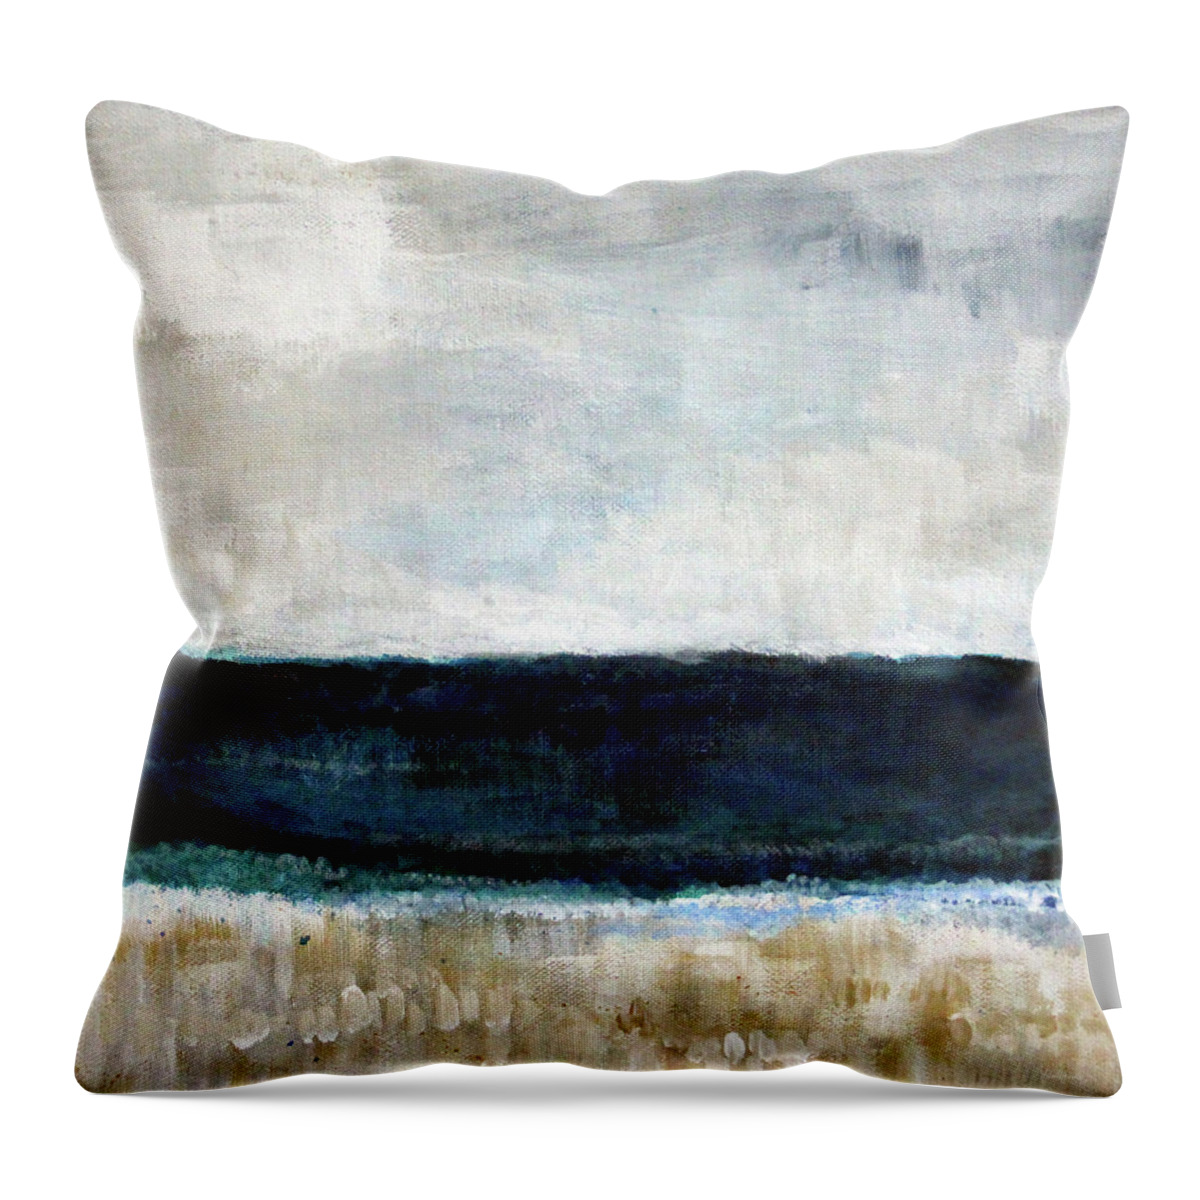 Beach Ocean Sea Surf Sand Landscape Beachscape Sky Clouds Impressionist Abstract Landscape Coast California Beach Cottage Stormy Sky Water Waves Nature Sand Bedroom Art Living Room Art Gallery Wall Art Art For Interior Designers Hospitality Art Set Design Wedding Gift Art By Linda Woods Beach Greeting Card Beach Iphone Case Abstract Landscape Ventura Santa Barbara Palm Beach Florida Throw Pillow featuring the painting Beach- abstract painting by Linda Woods